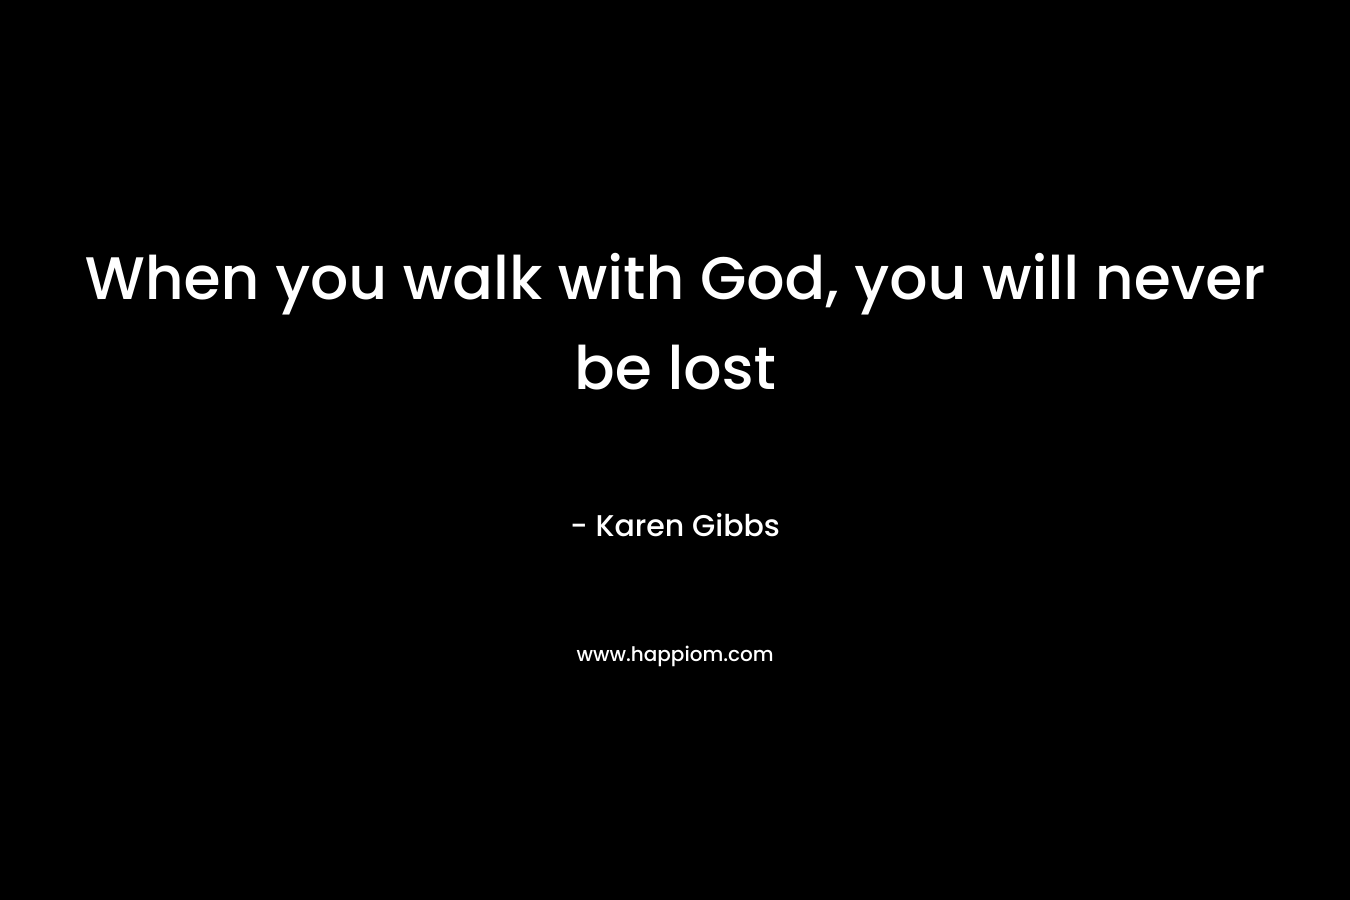 When you walk with God, you will never be lost